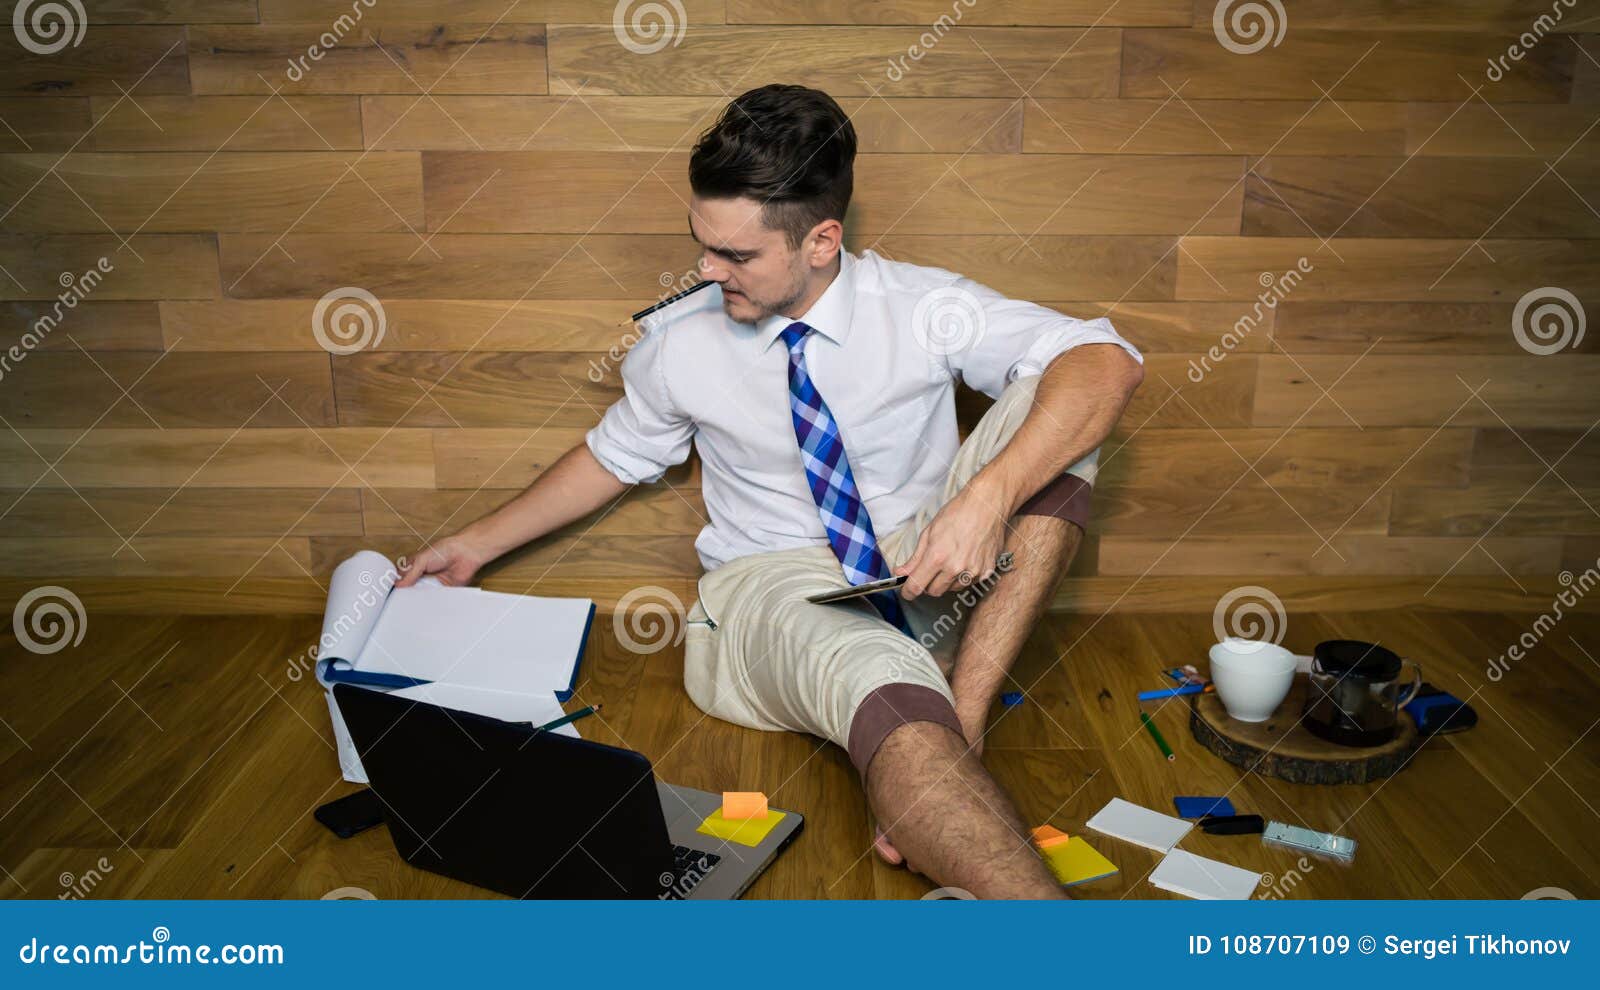 Young Man Remote Working at Home in Funny Clothes Stock Image ...